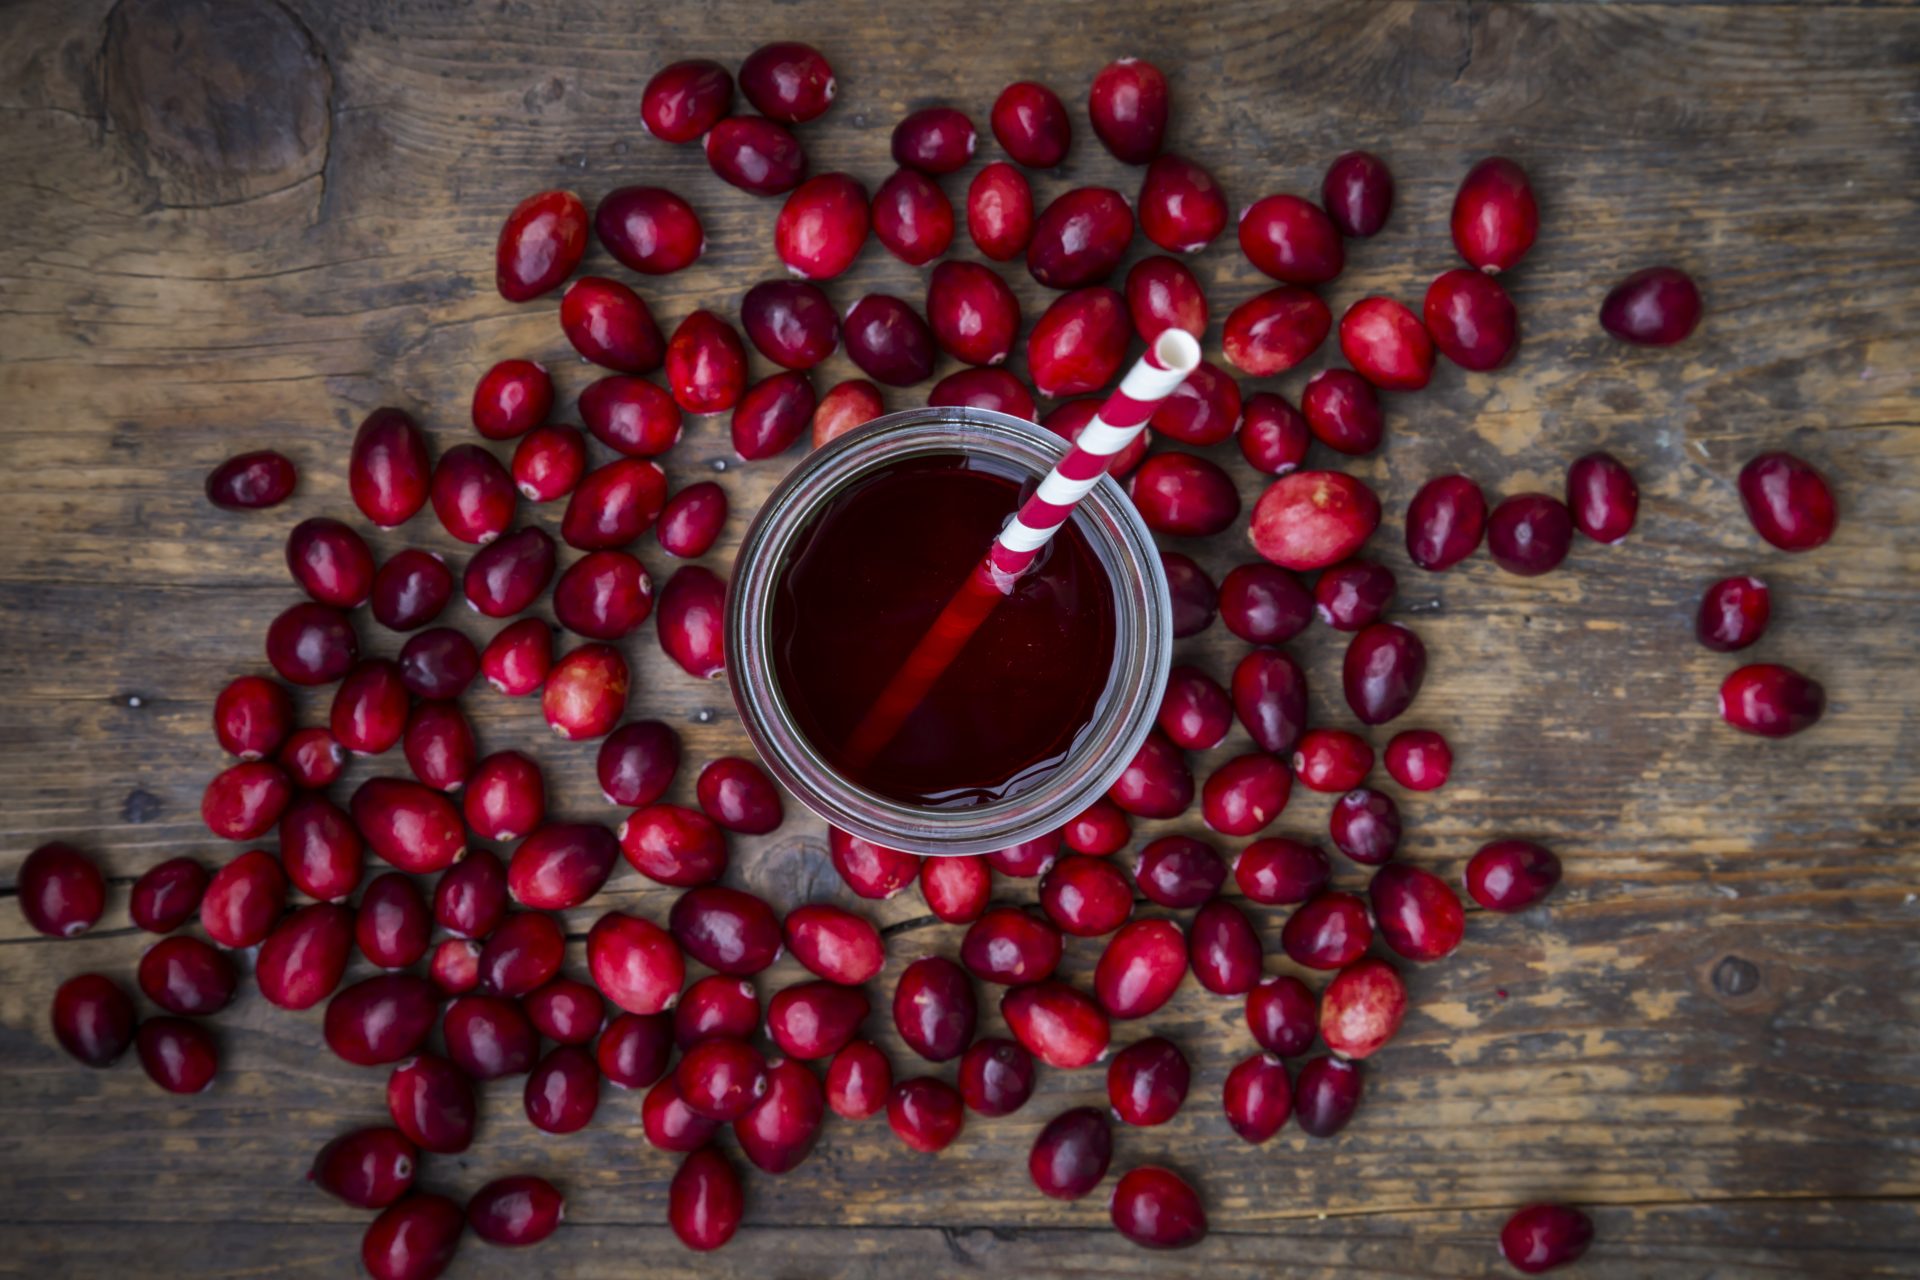 Cranberry juice really can help you heal from a urinary tract infection